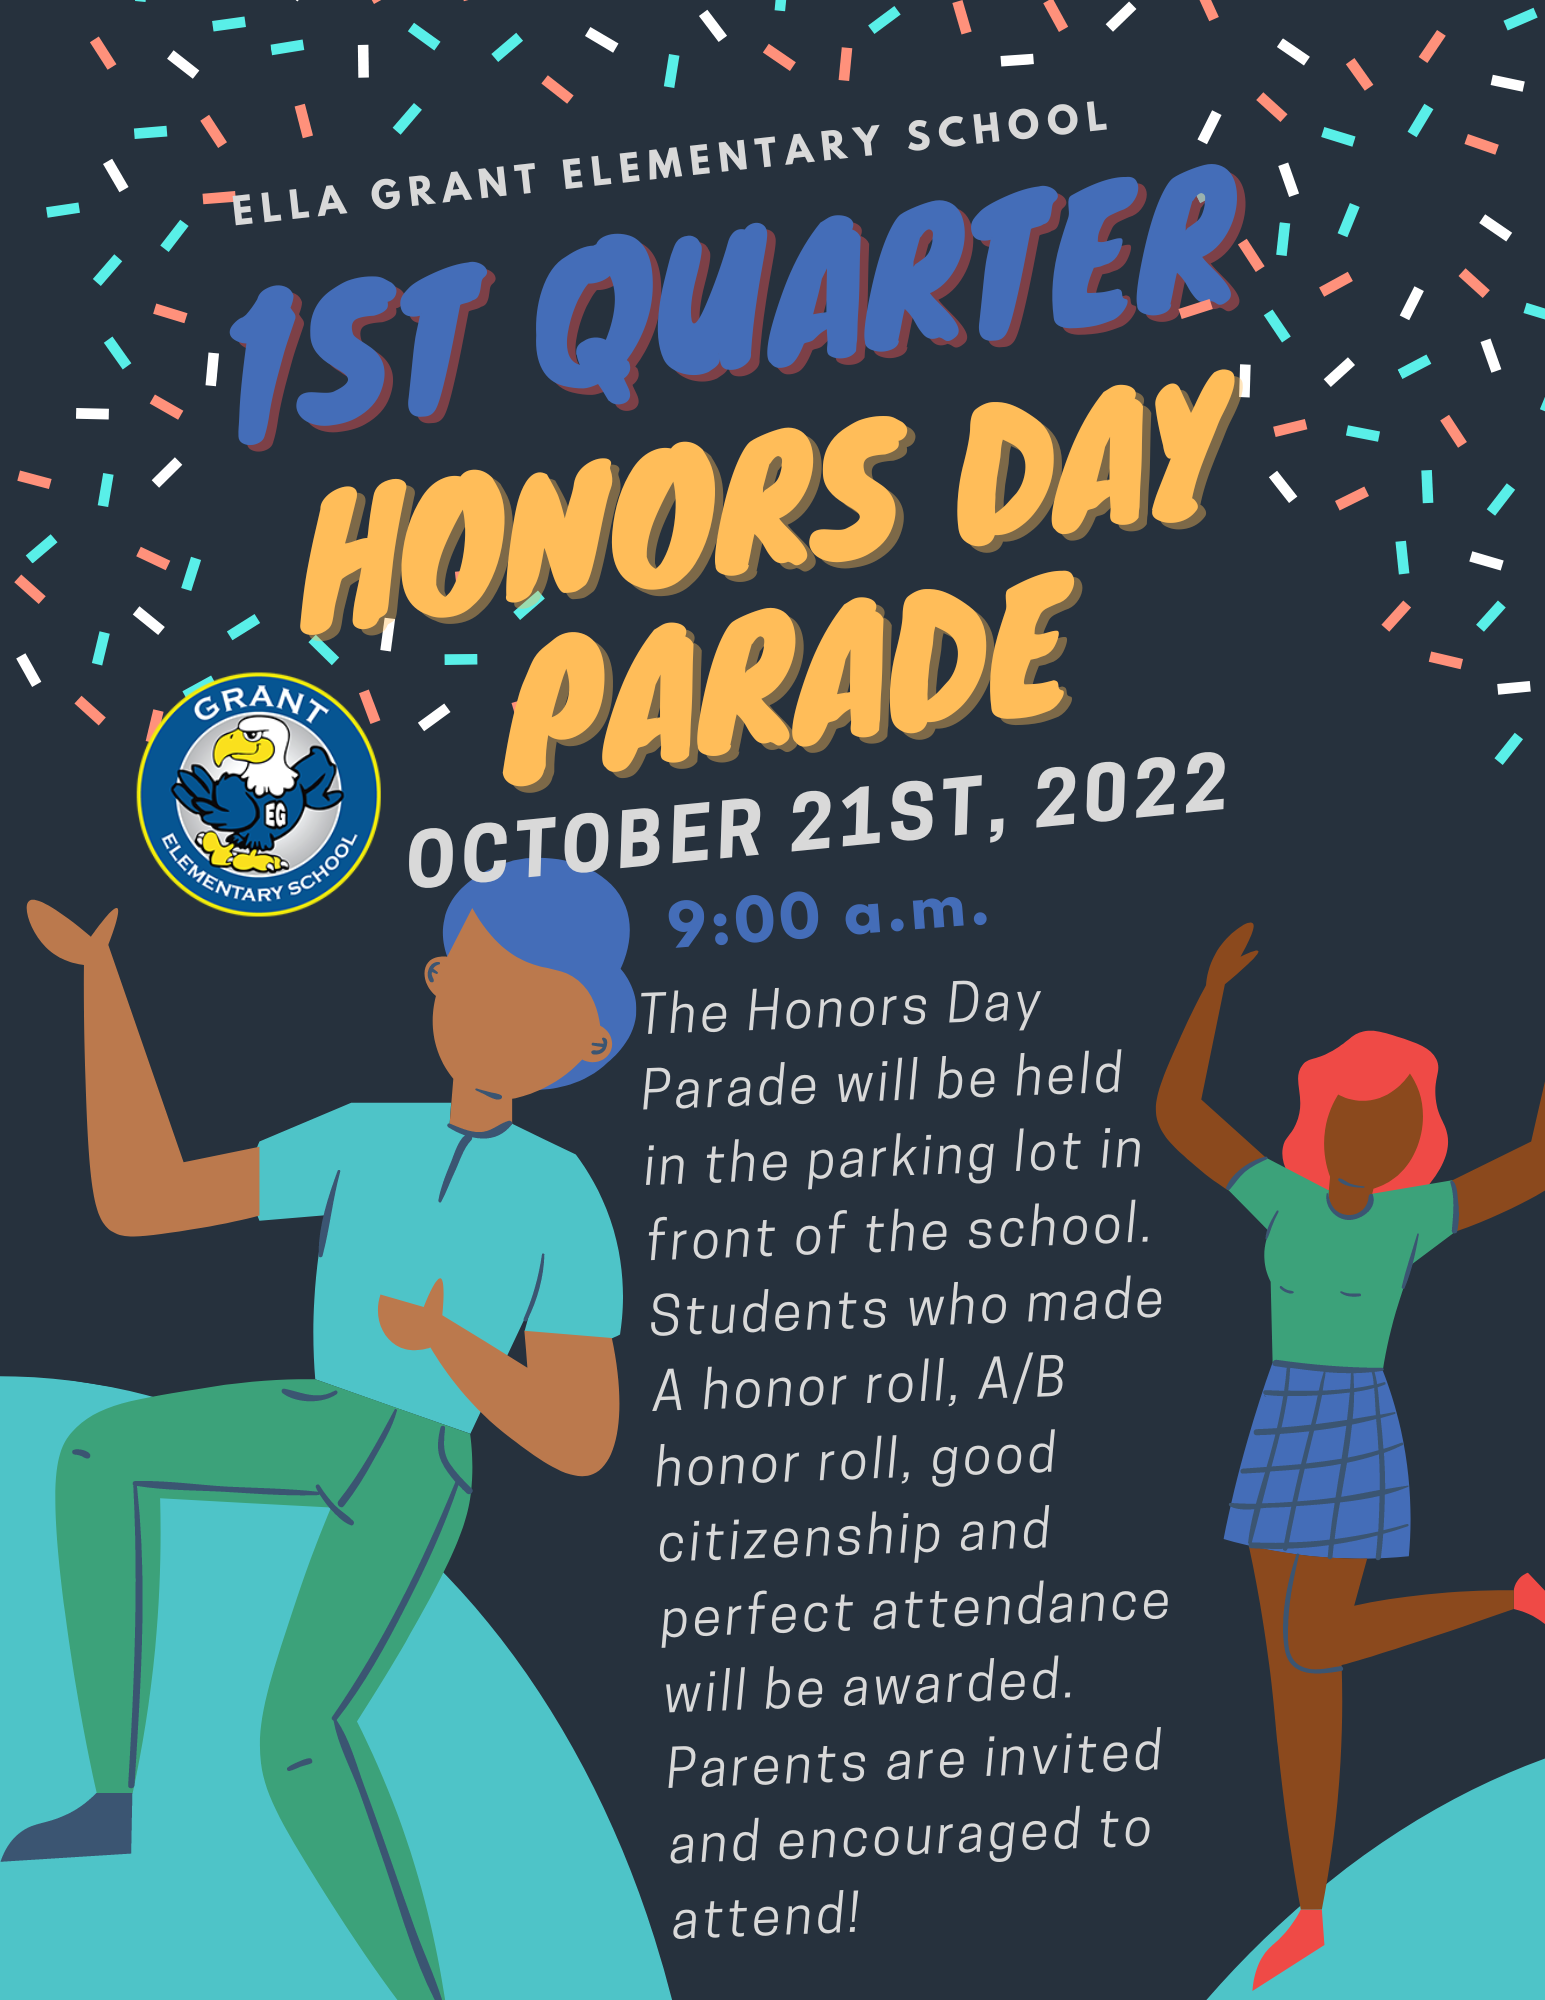 First Quarter Honors Day Parade Flyer